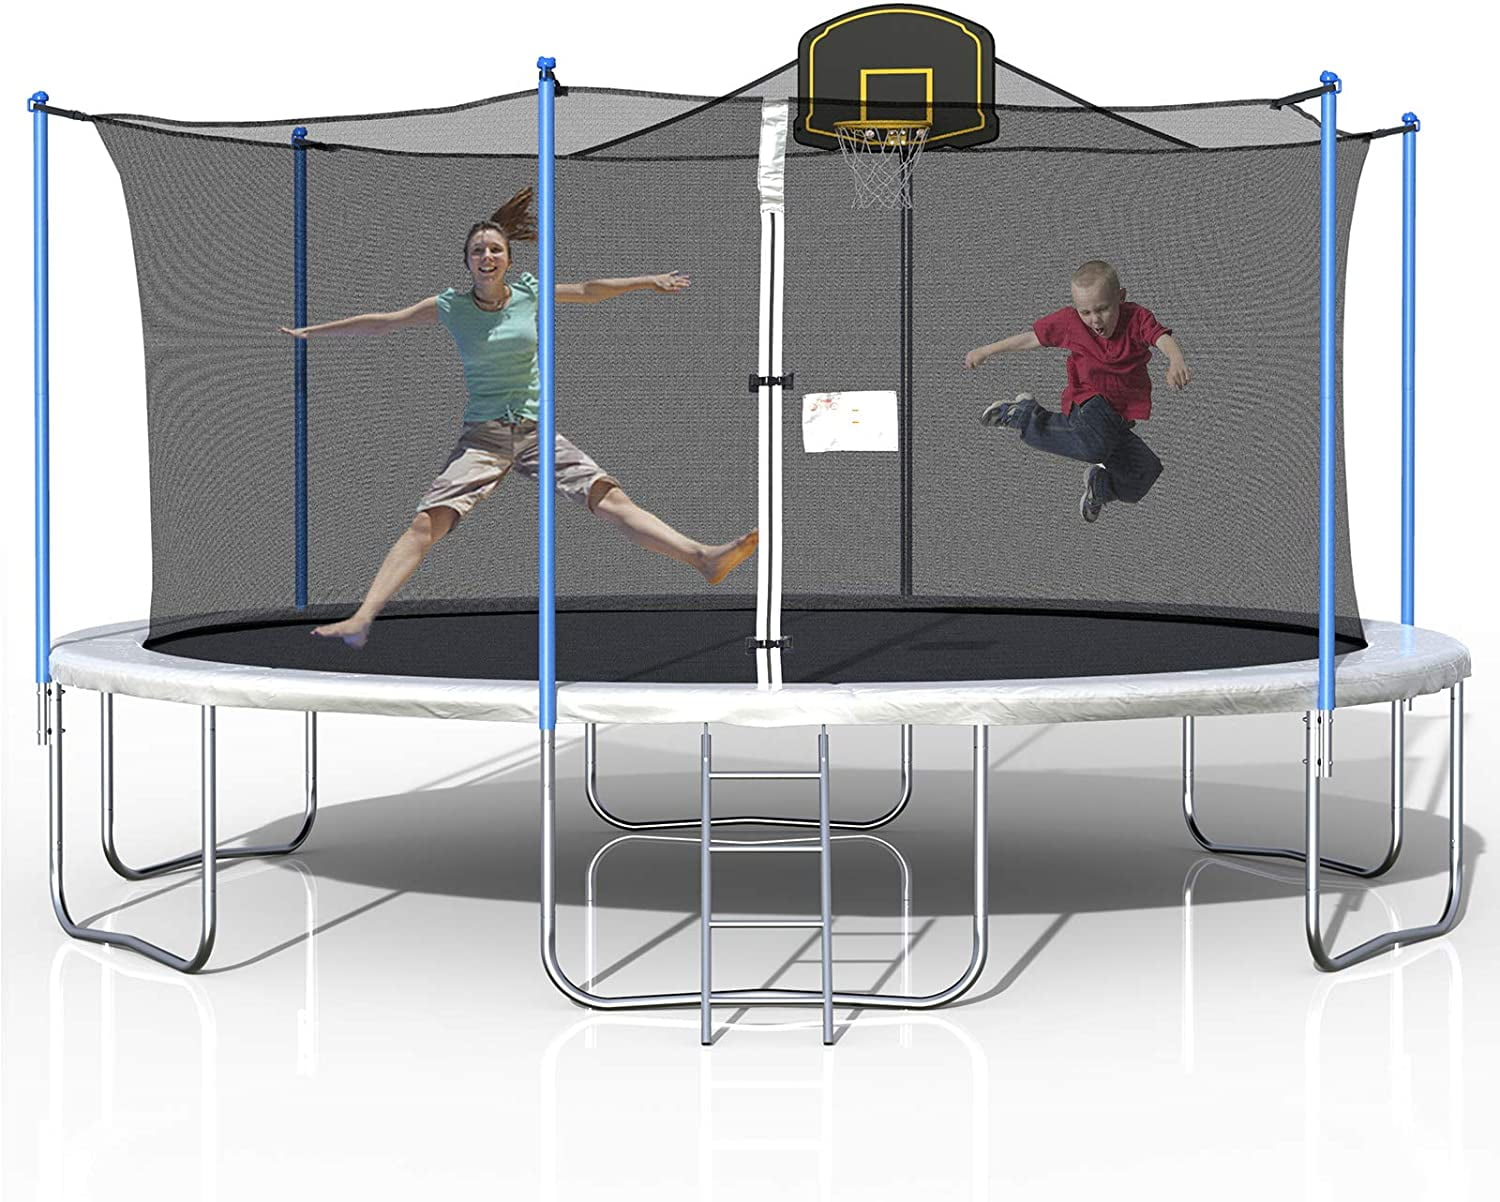 Outdoor Trampoline for Kids, 16FT Trampoline with Backboard Enclosure Net, Safety Spring Cover Padding, Basketball Hoop & Ladder, Outdoor Activity for Children, Silver